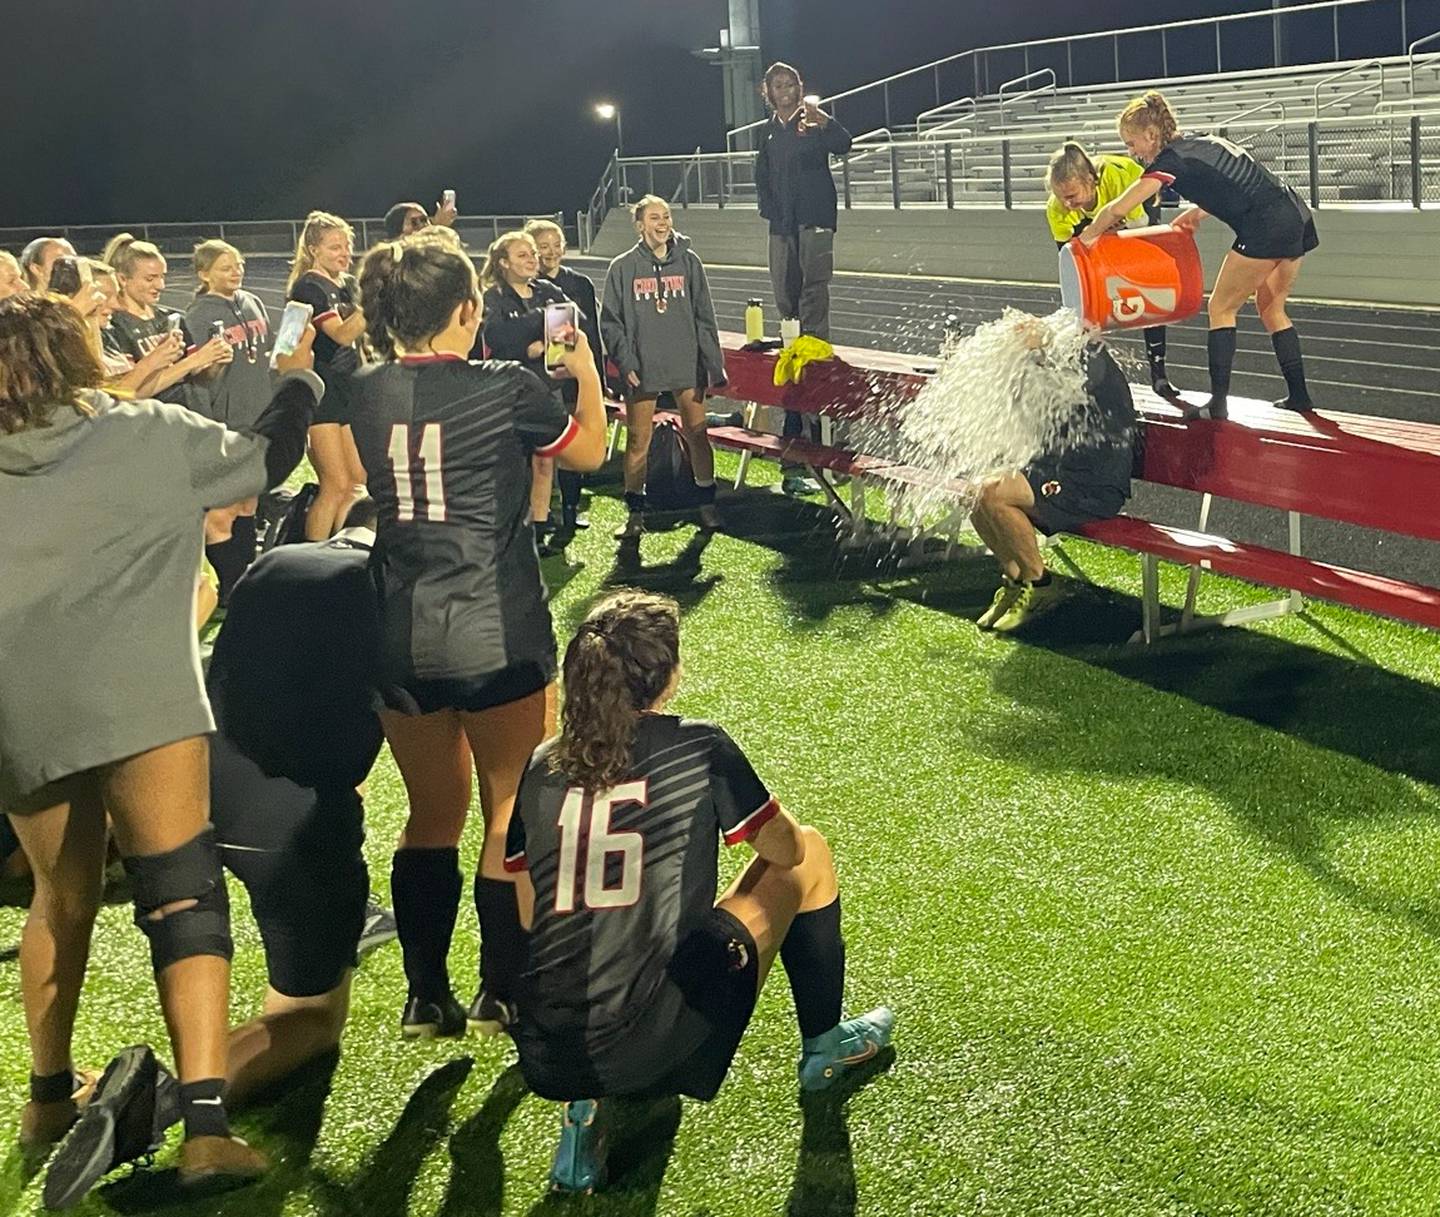 Crofton soccer coach Jason Bonfigli (sitting) gets a celebratory water dumping after Friday's overtime victory over Towson. The Cardinals, in its second varsity season, advanced to the Class 3A state semifinals with a 1-0 decision in Anne Arundel County.